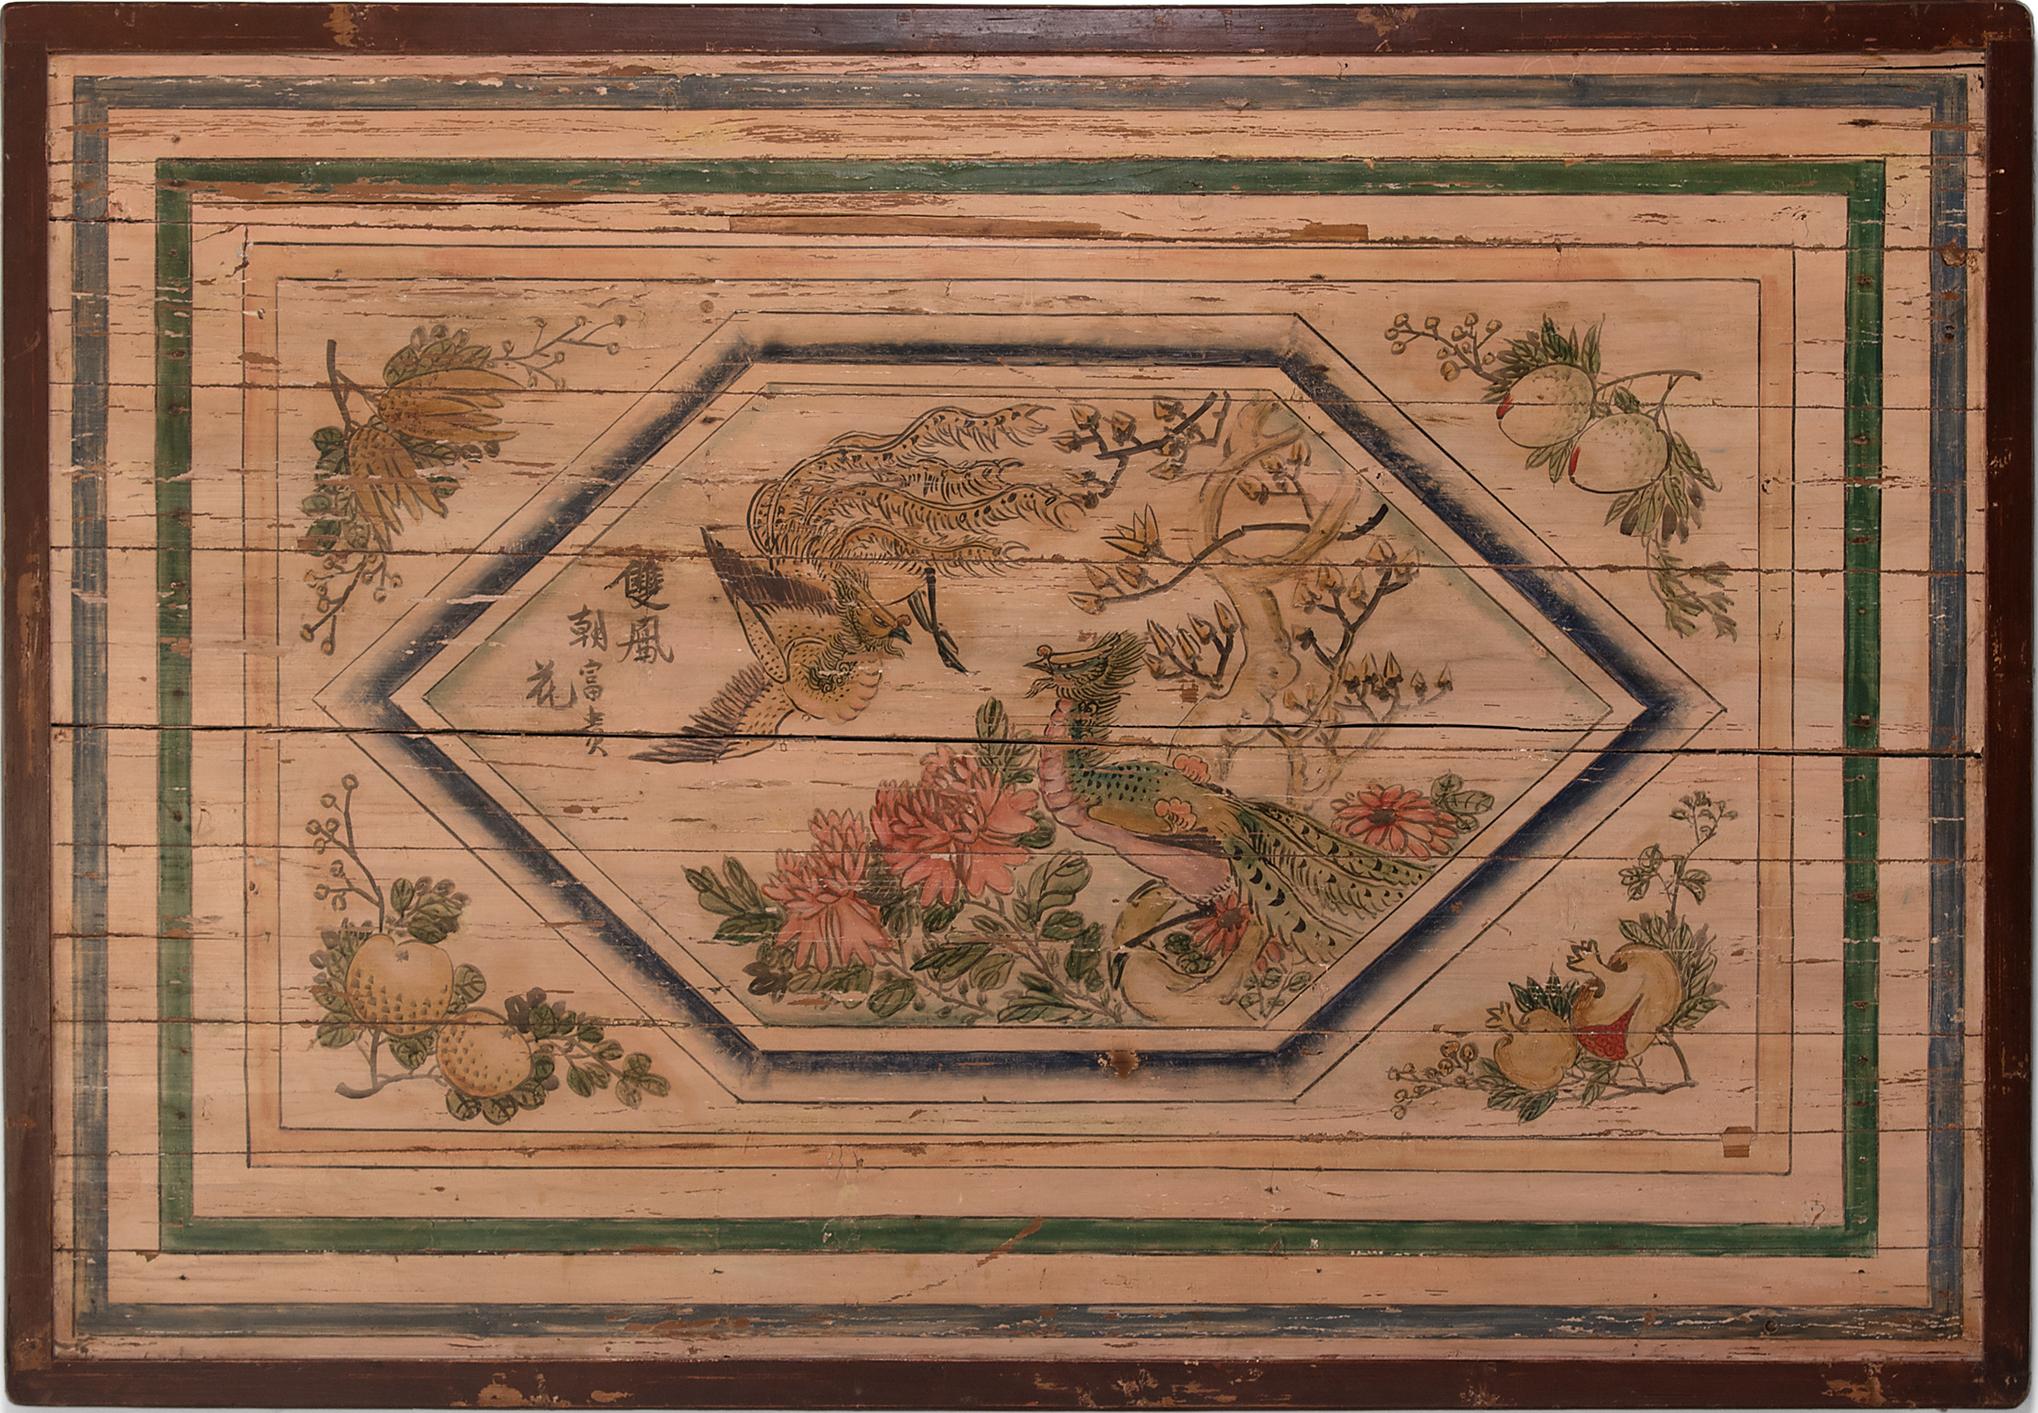 Chinese Bed Canopy of Phoenix and Fruits, Paint on Wood Panel, c. 1850